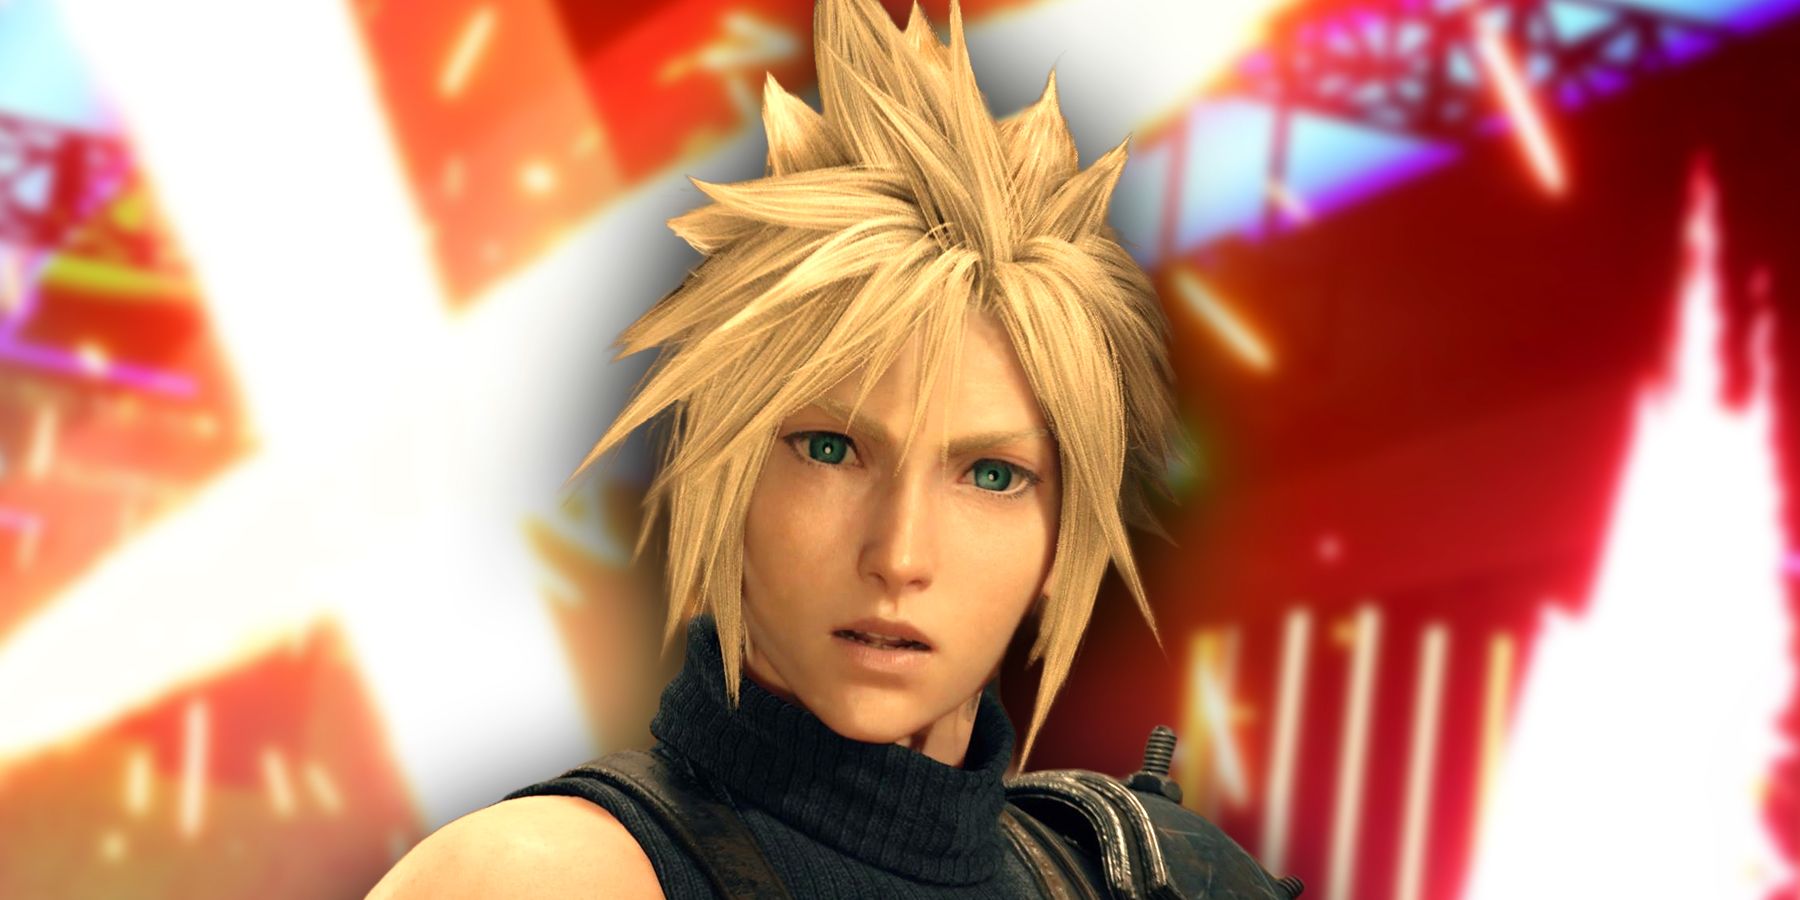 Cloud with an open-mouthed expression in FF7 Rebirth.